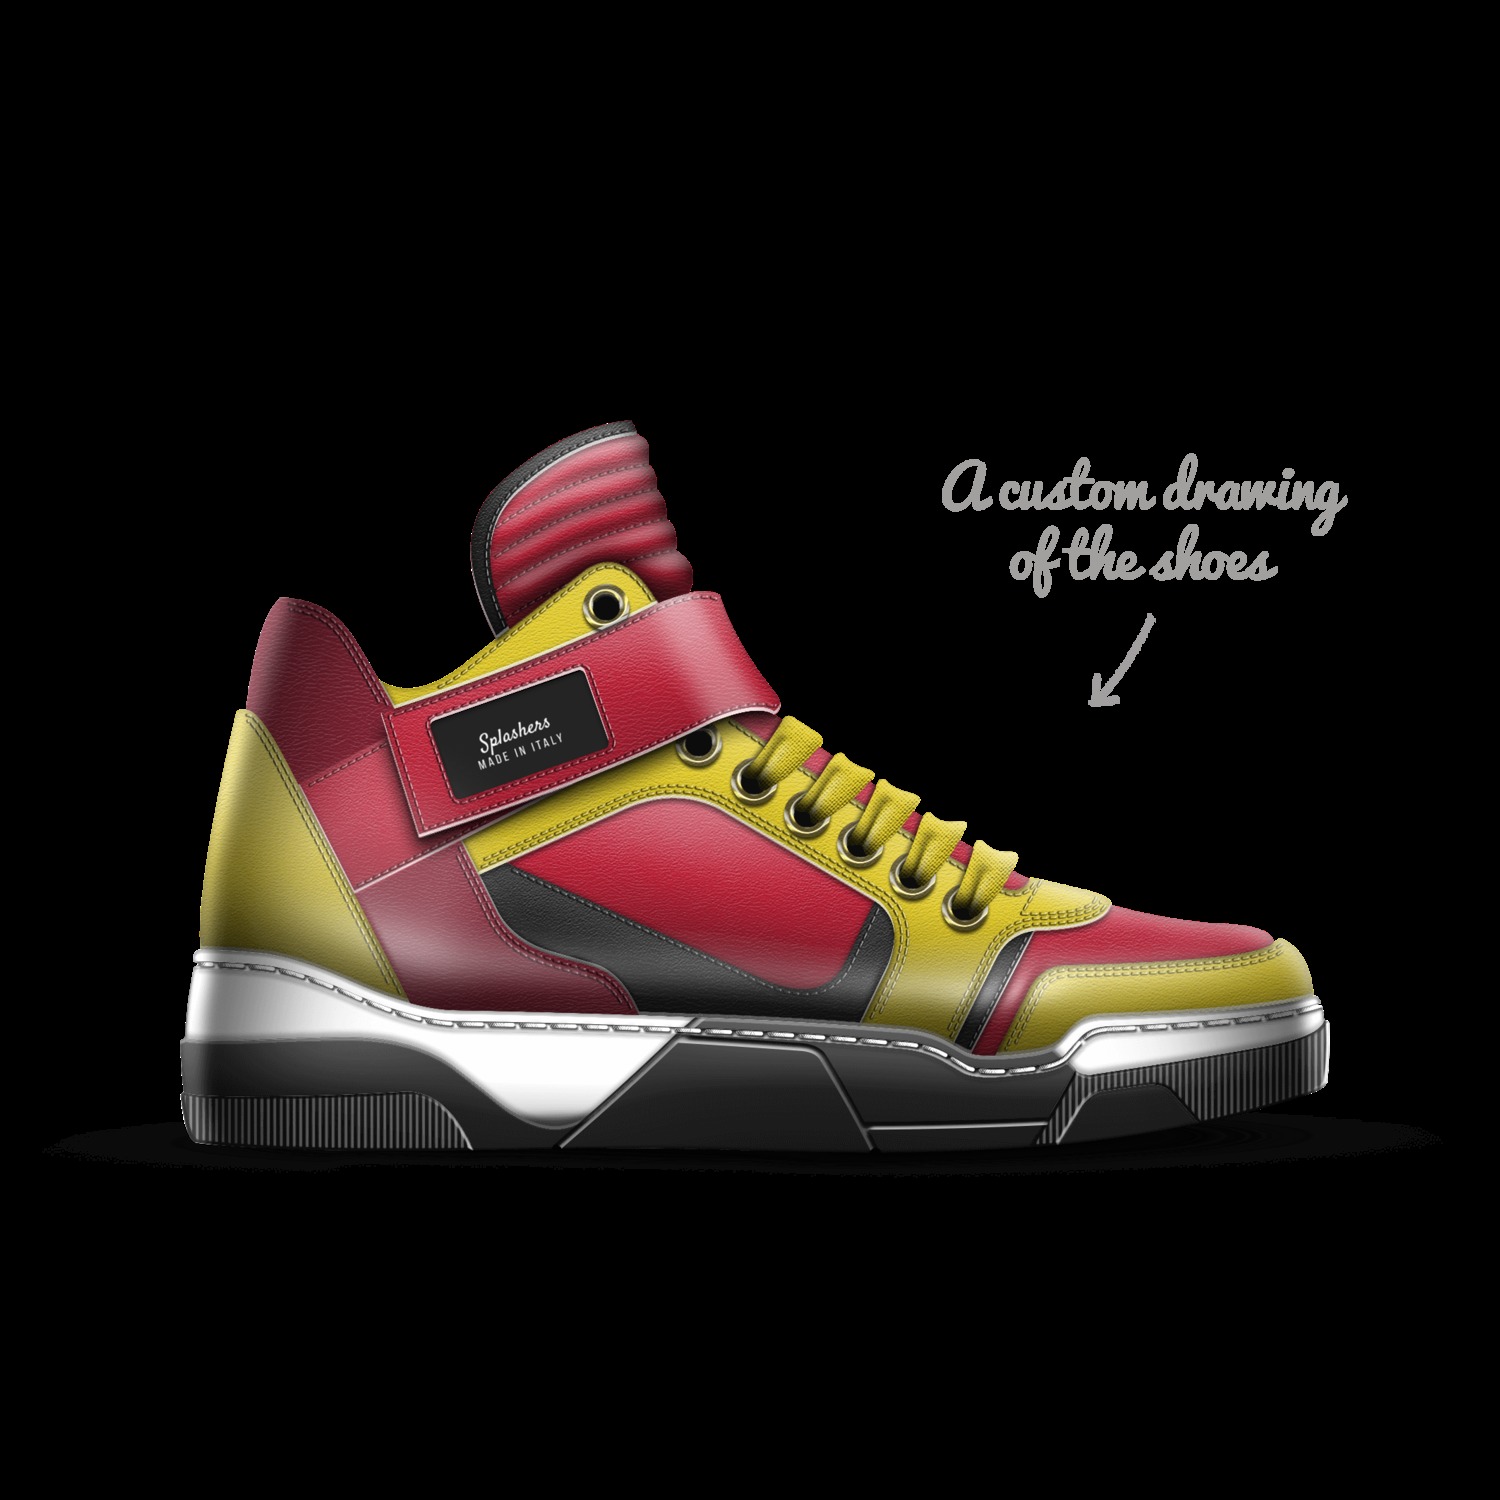 A Custom Shoe concept by Carson Best